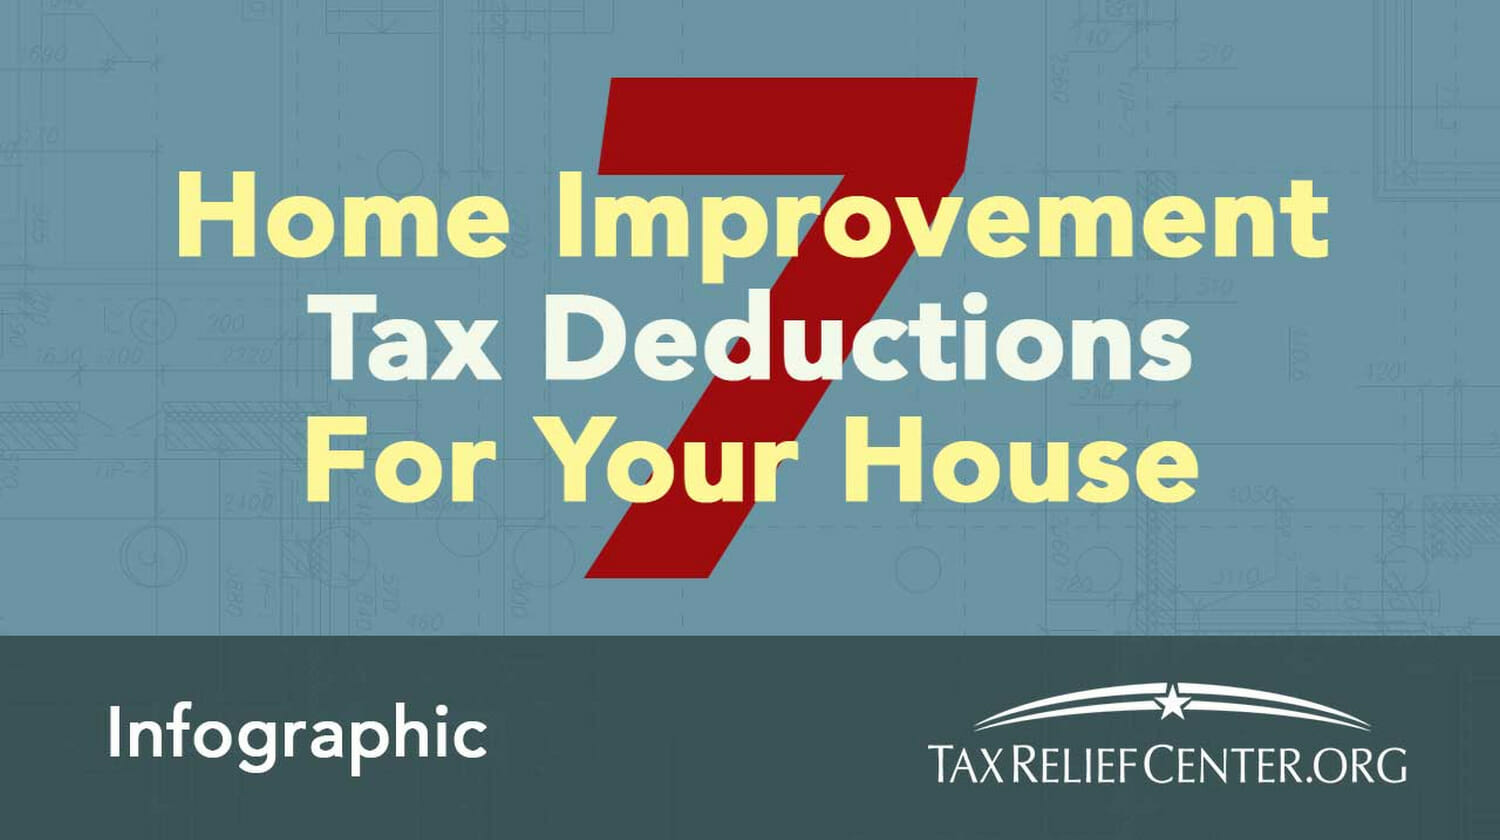 Featured | 7 Home Improvement Tax Deductions for Your House | Home Improvement Tax Deductions for Your House